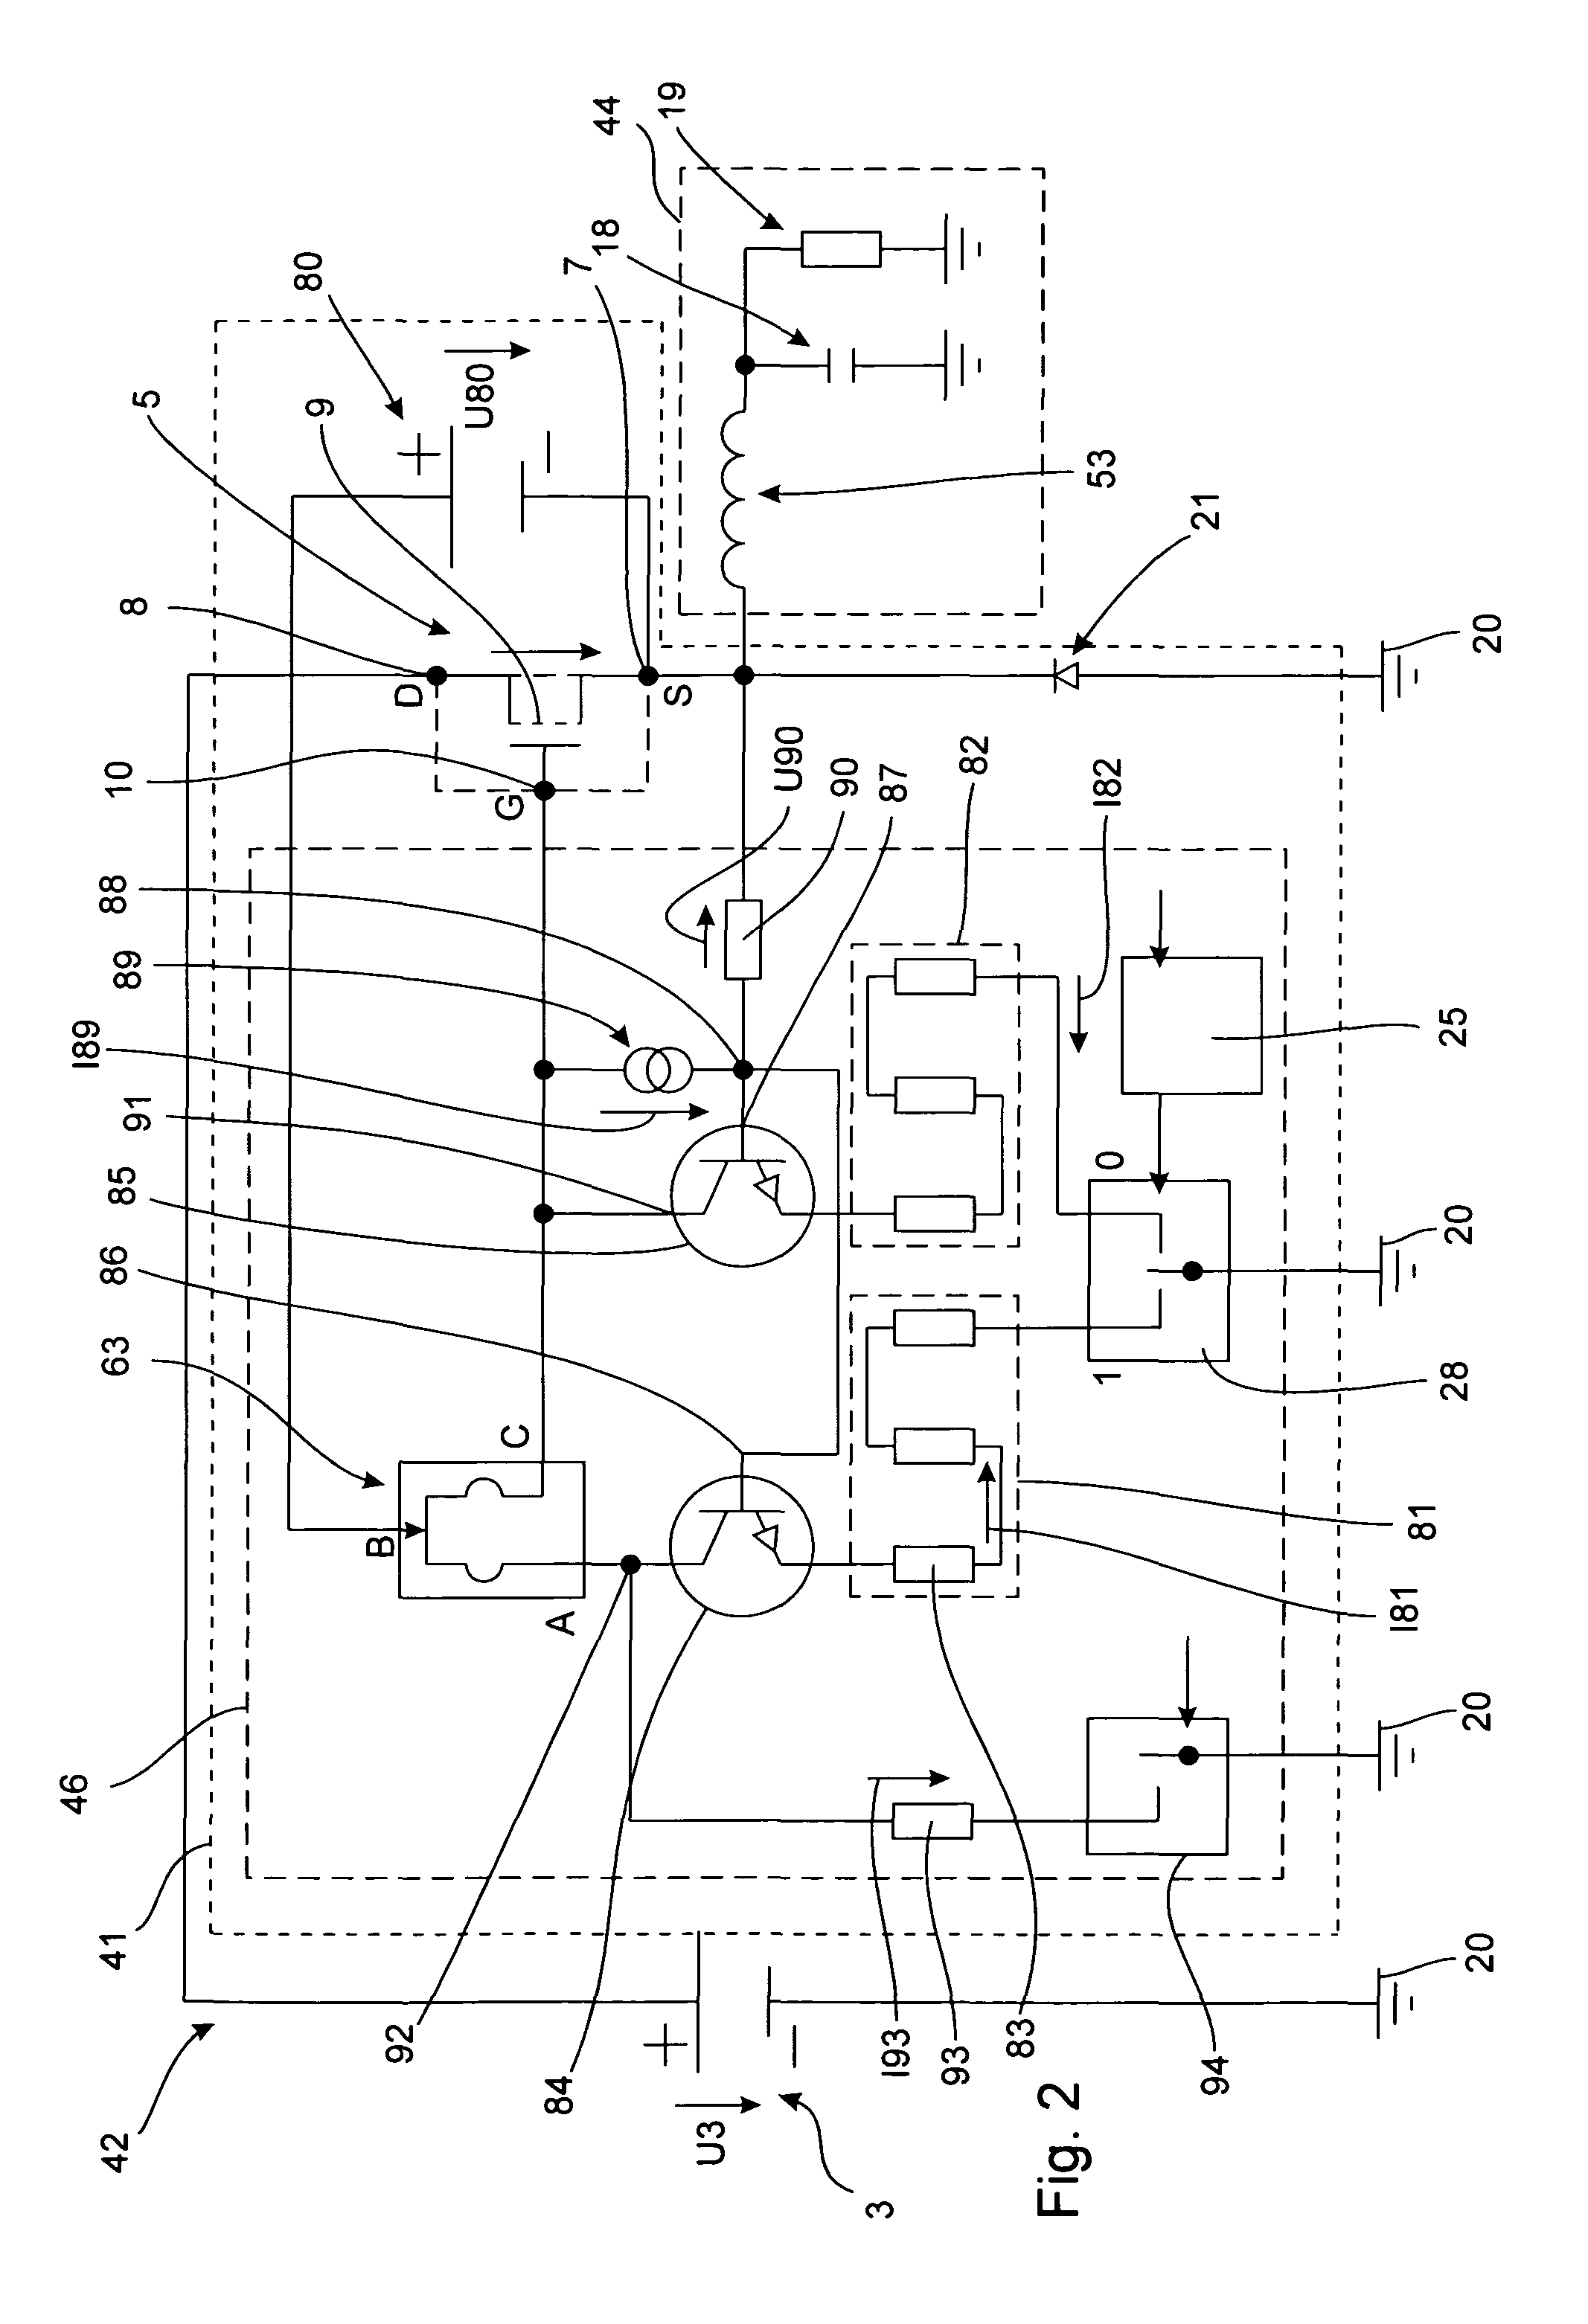 Control device and method for actuating a semiconductor switch